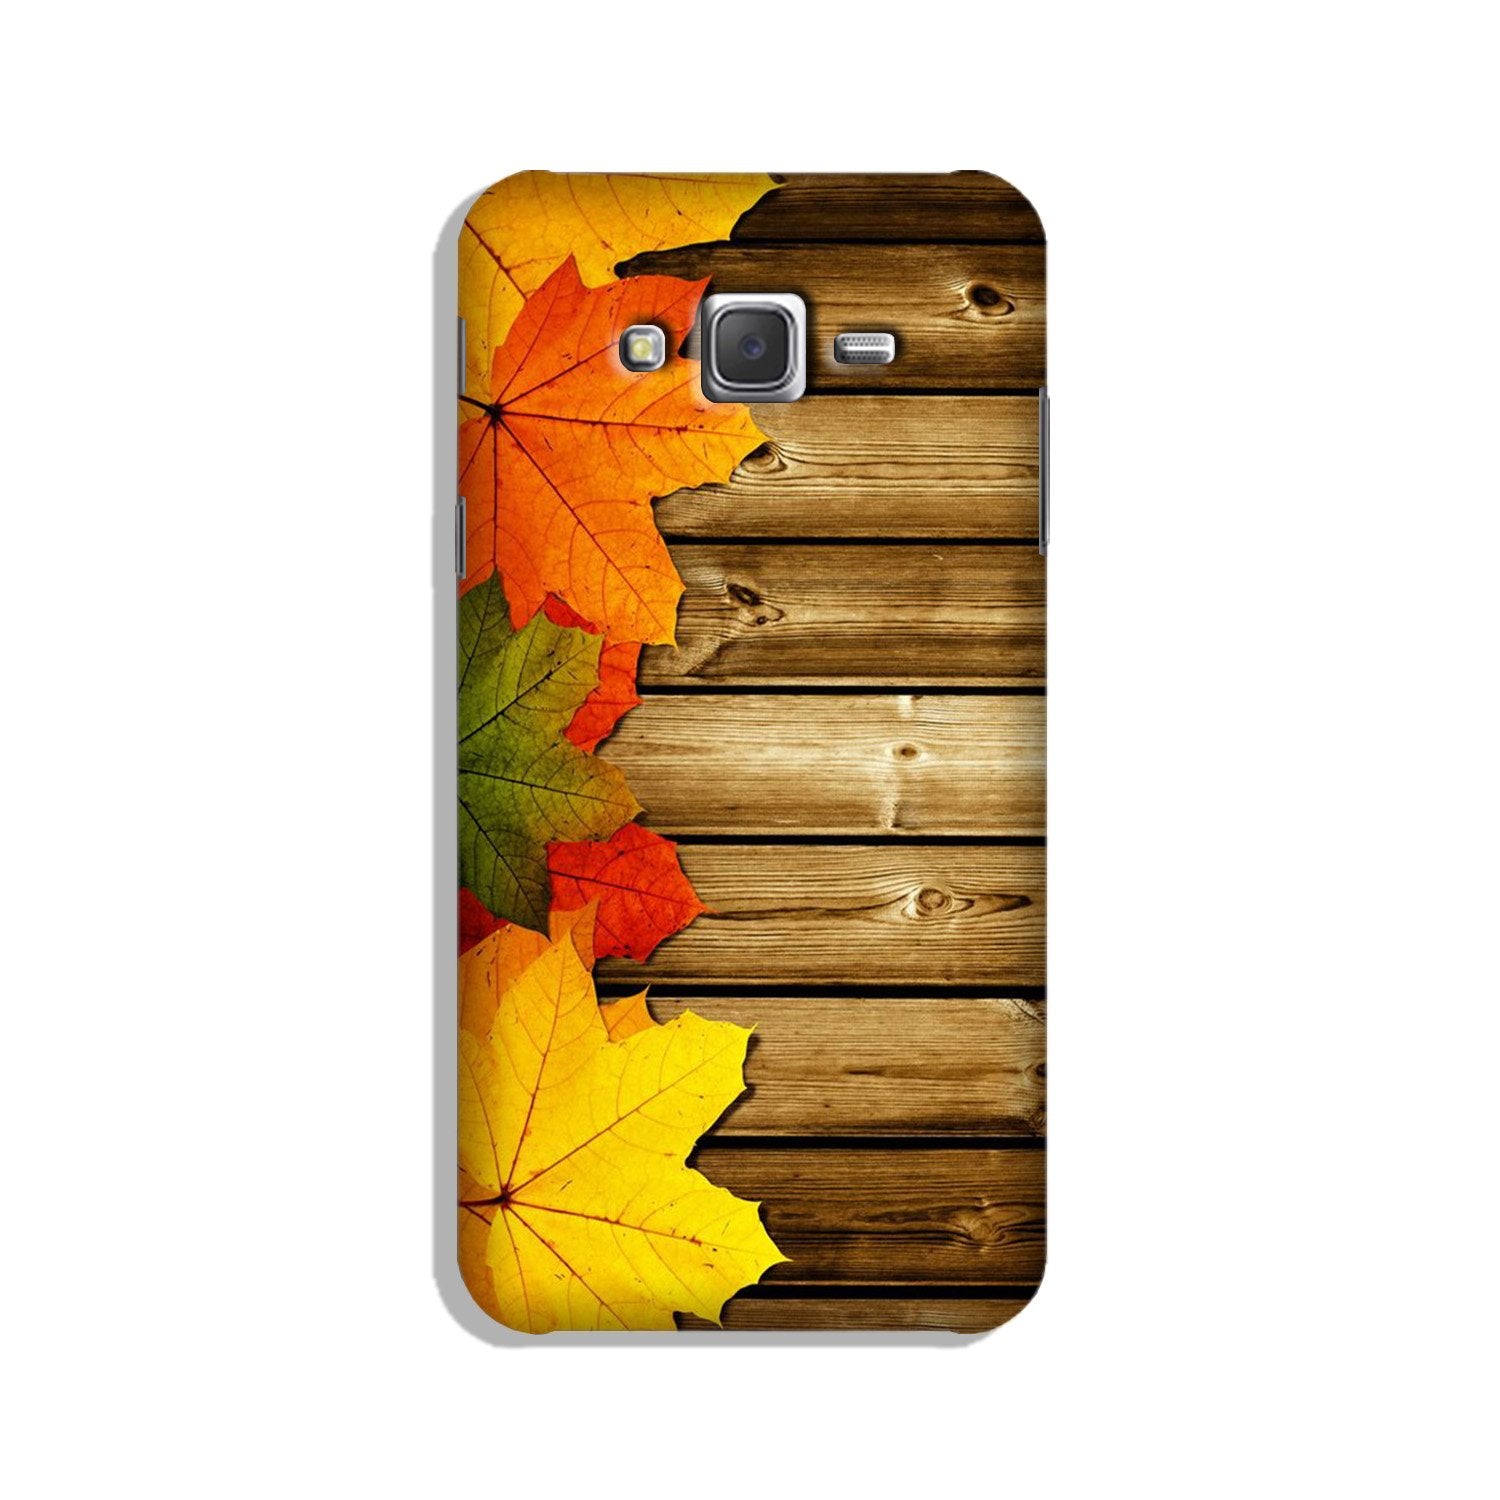 Wooden look3 Case for Galaxy J5 (2015)